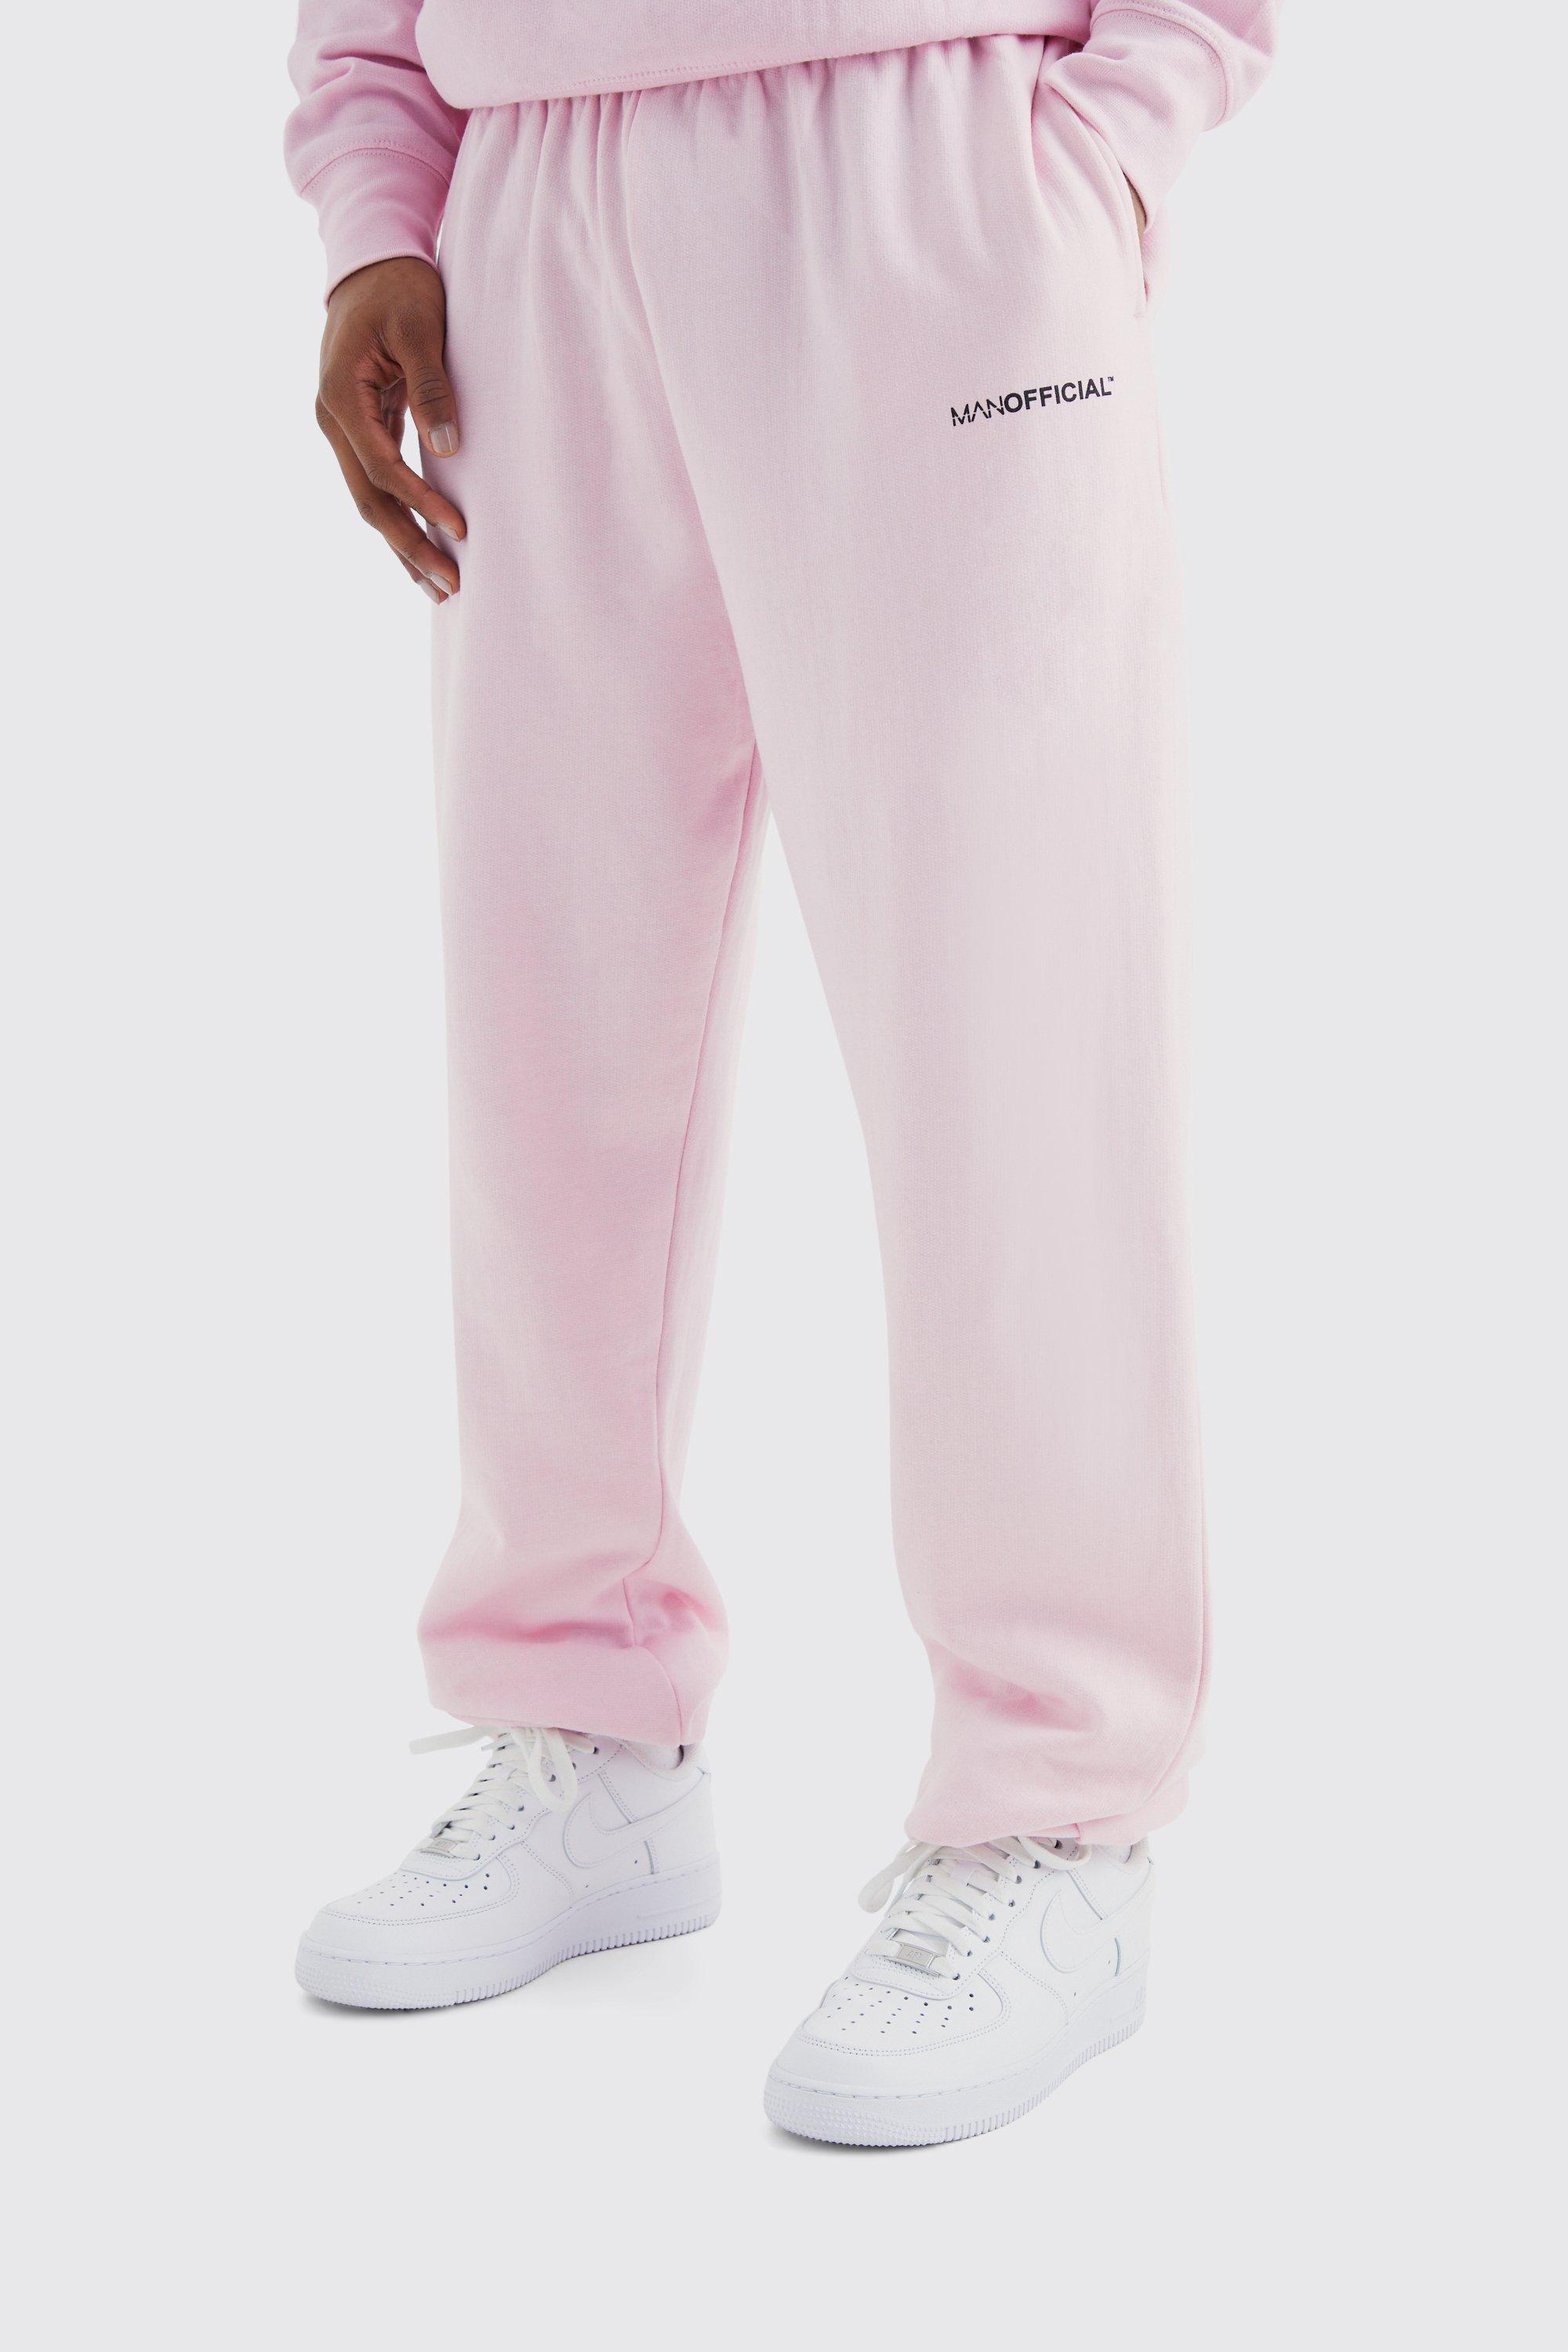 men's man official oversized joggers - pink - s, pink